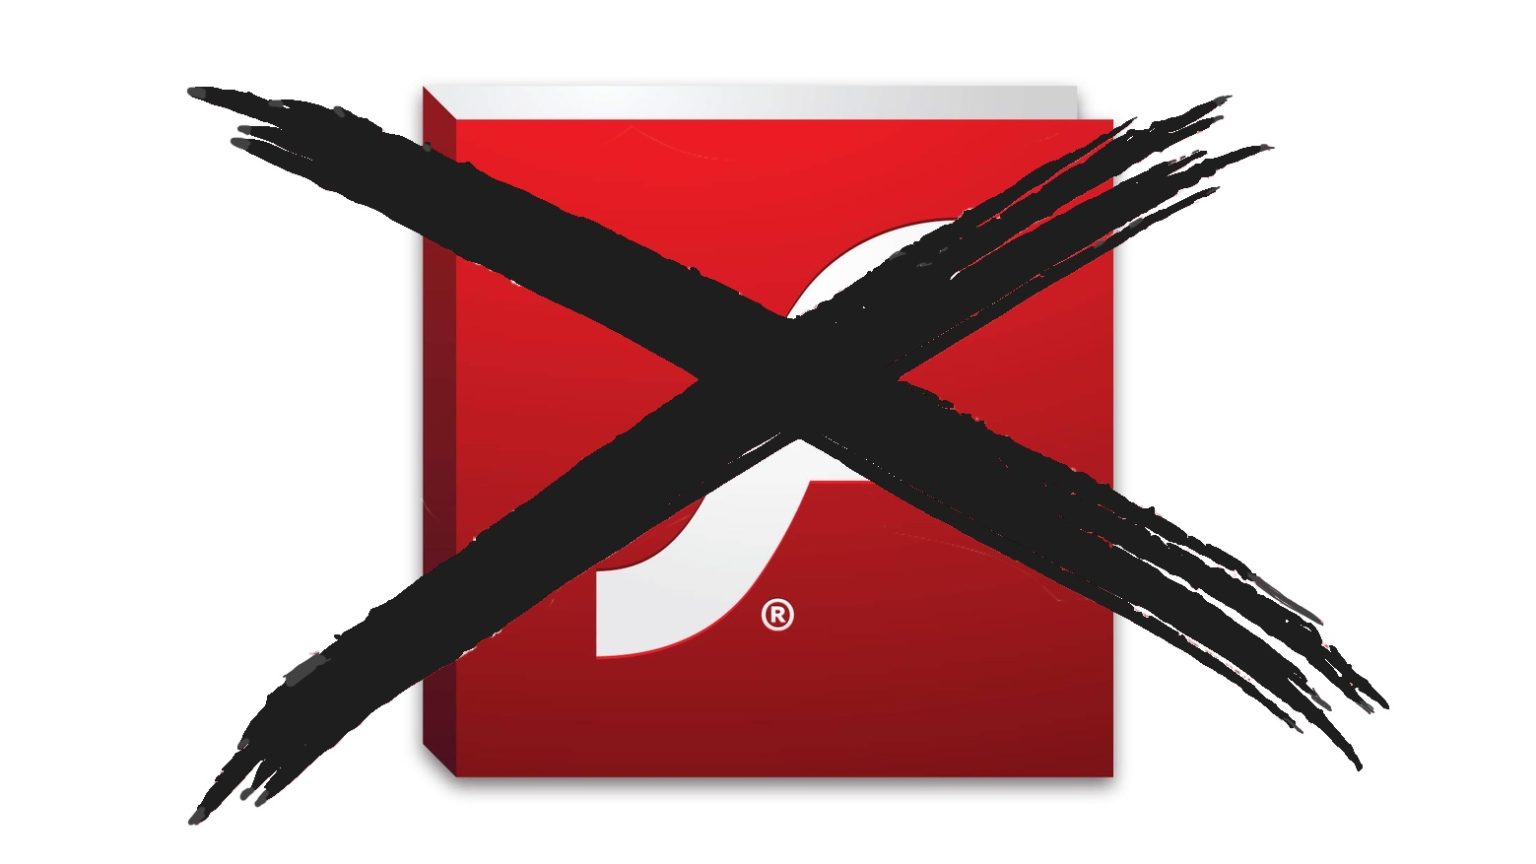 Adobe Flash is almost dead